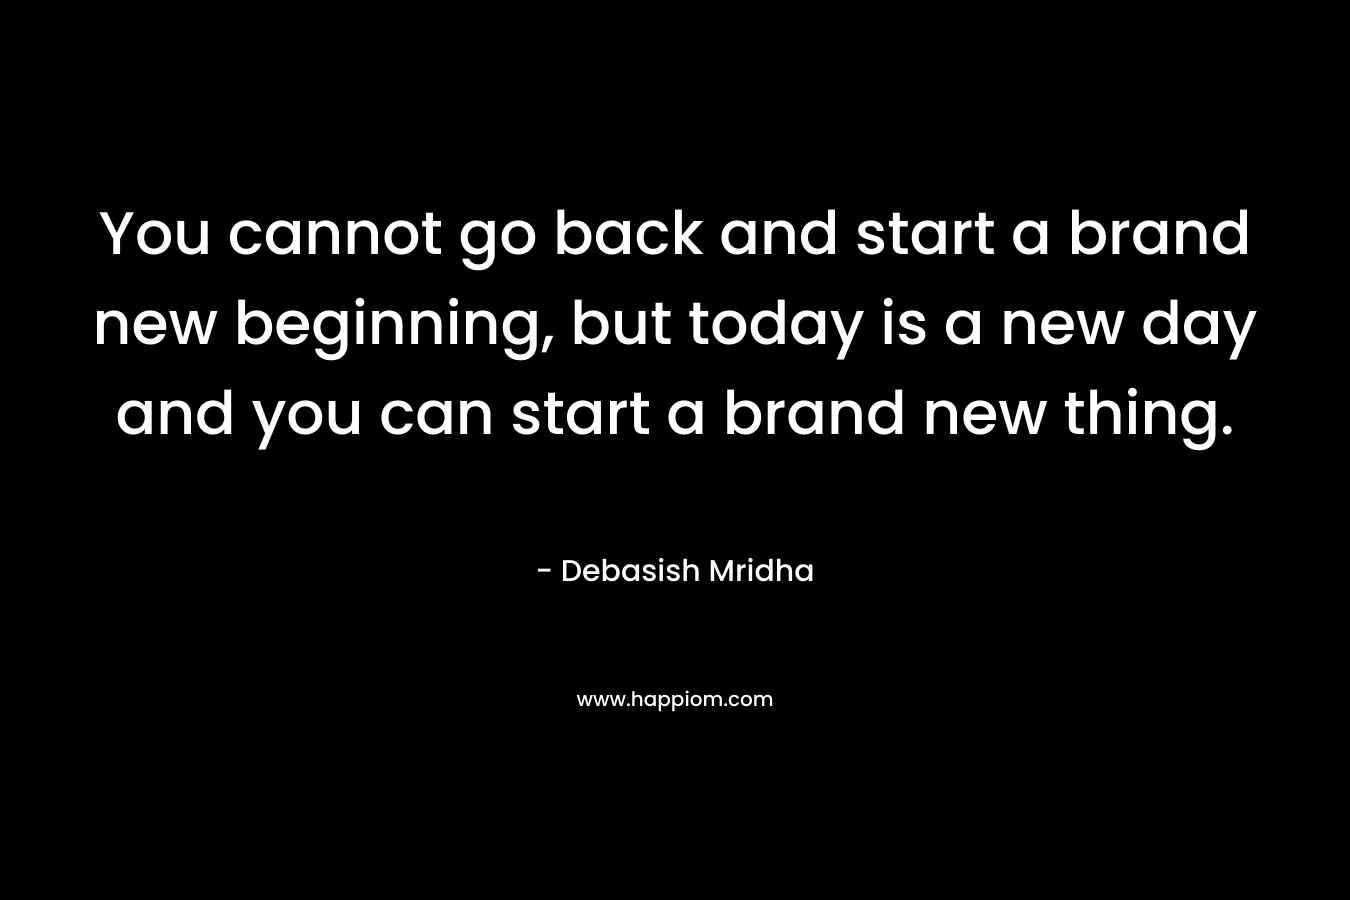 You cannot go back and start a brand new beginning, but today is a new day and you can start a brand new thing.